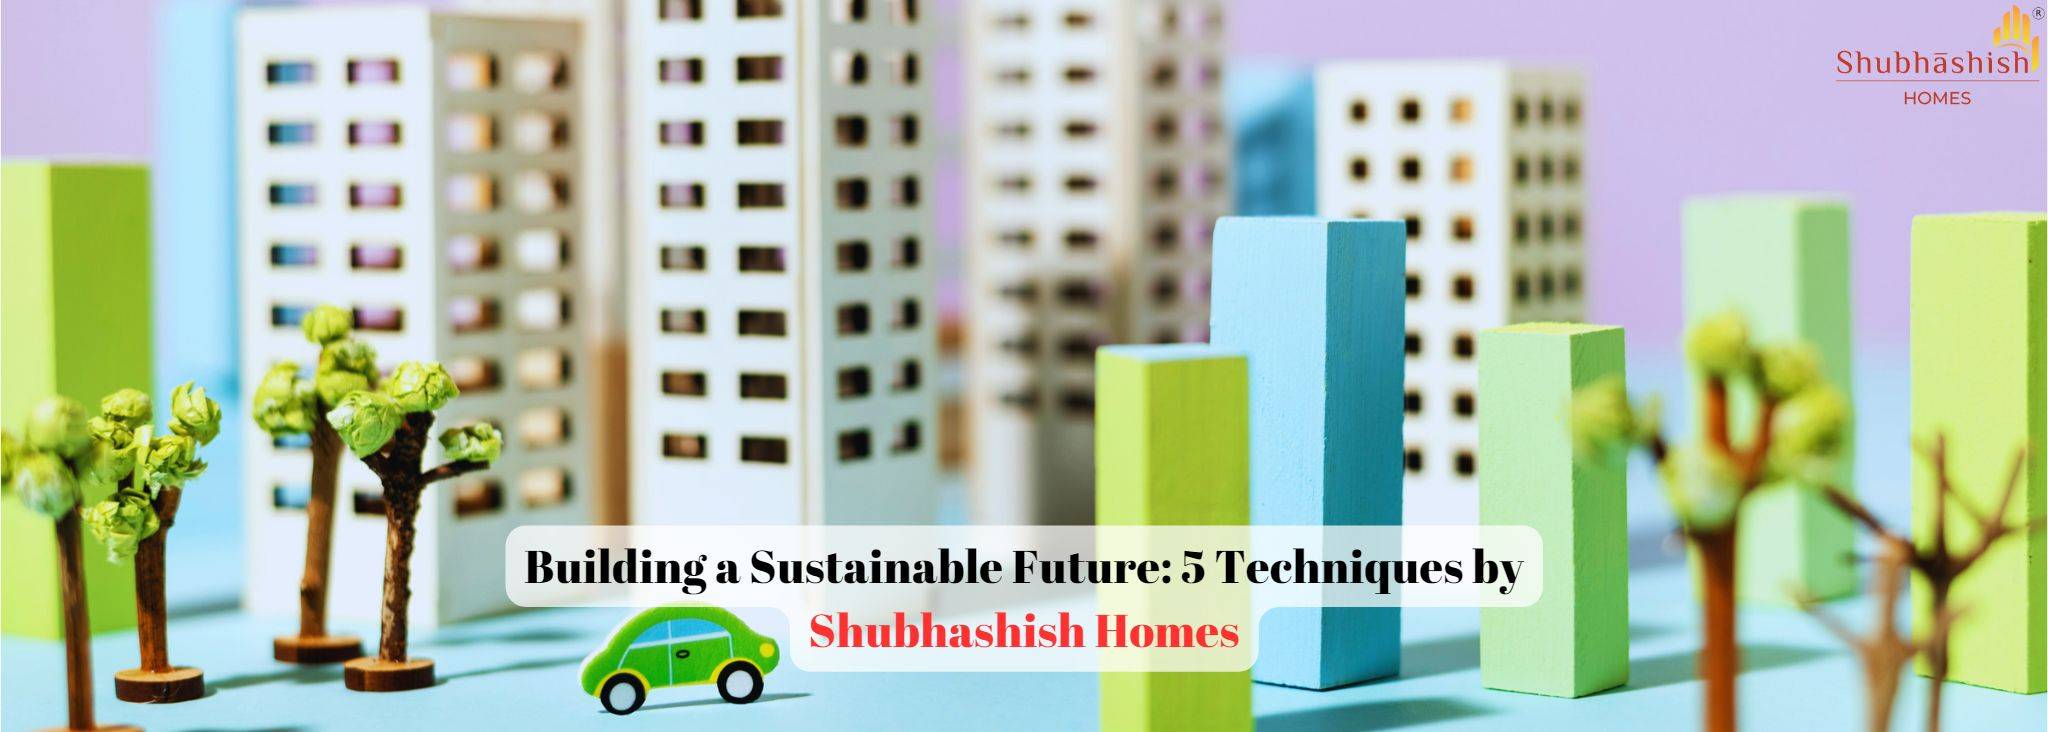 Building a Sustainable Future: 5 Techniques by Shubhashish Homes